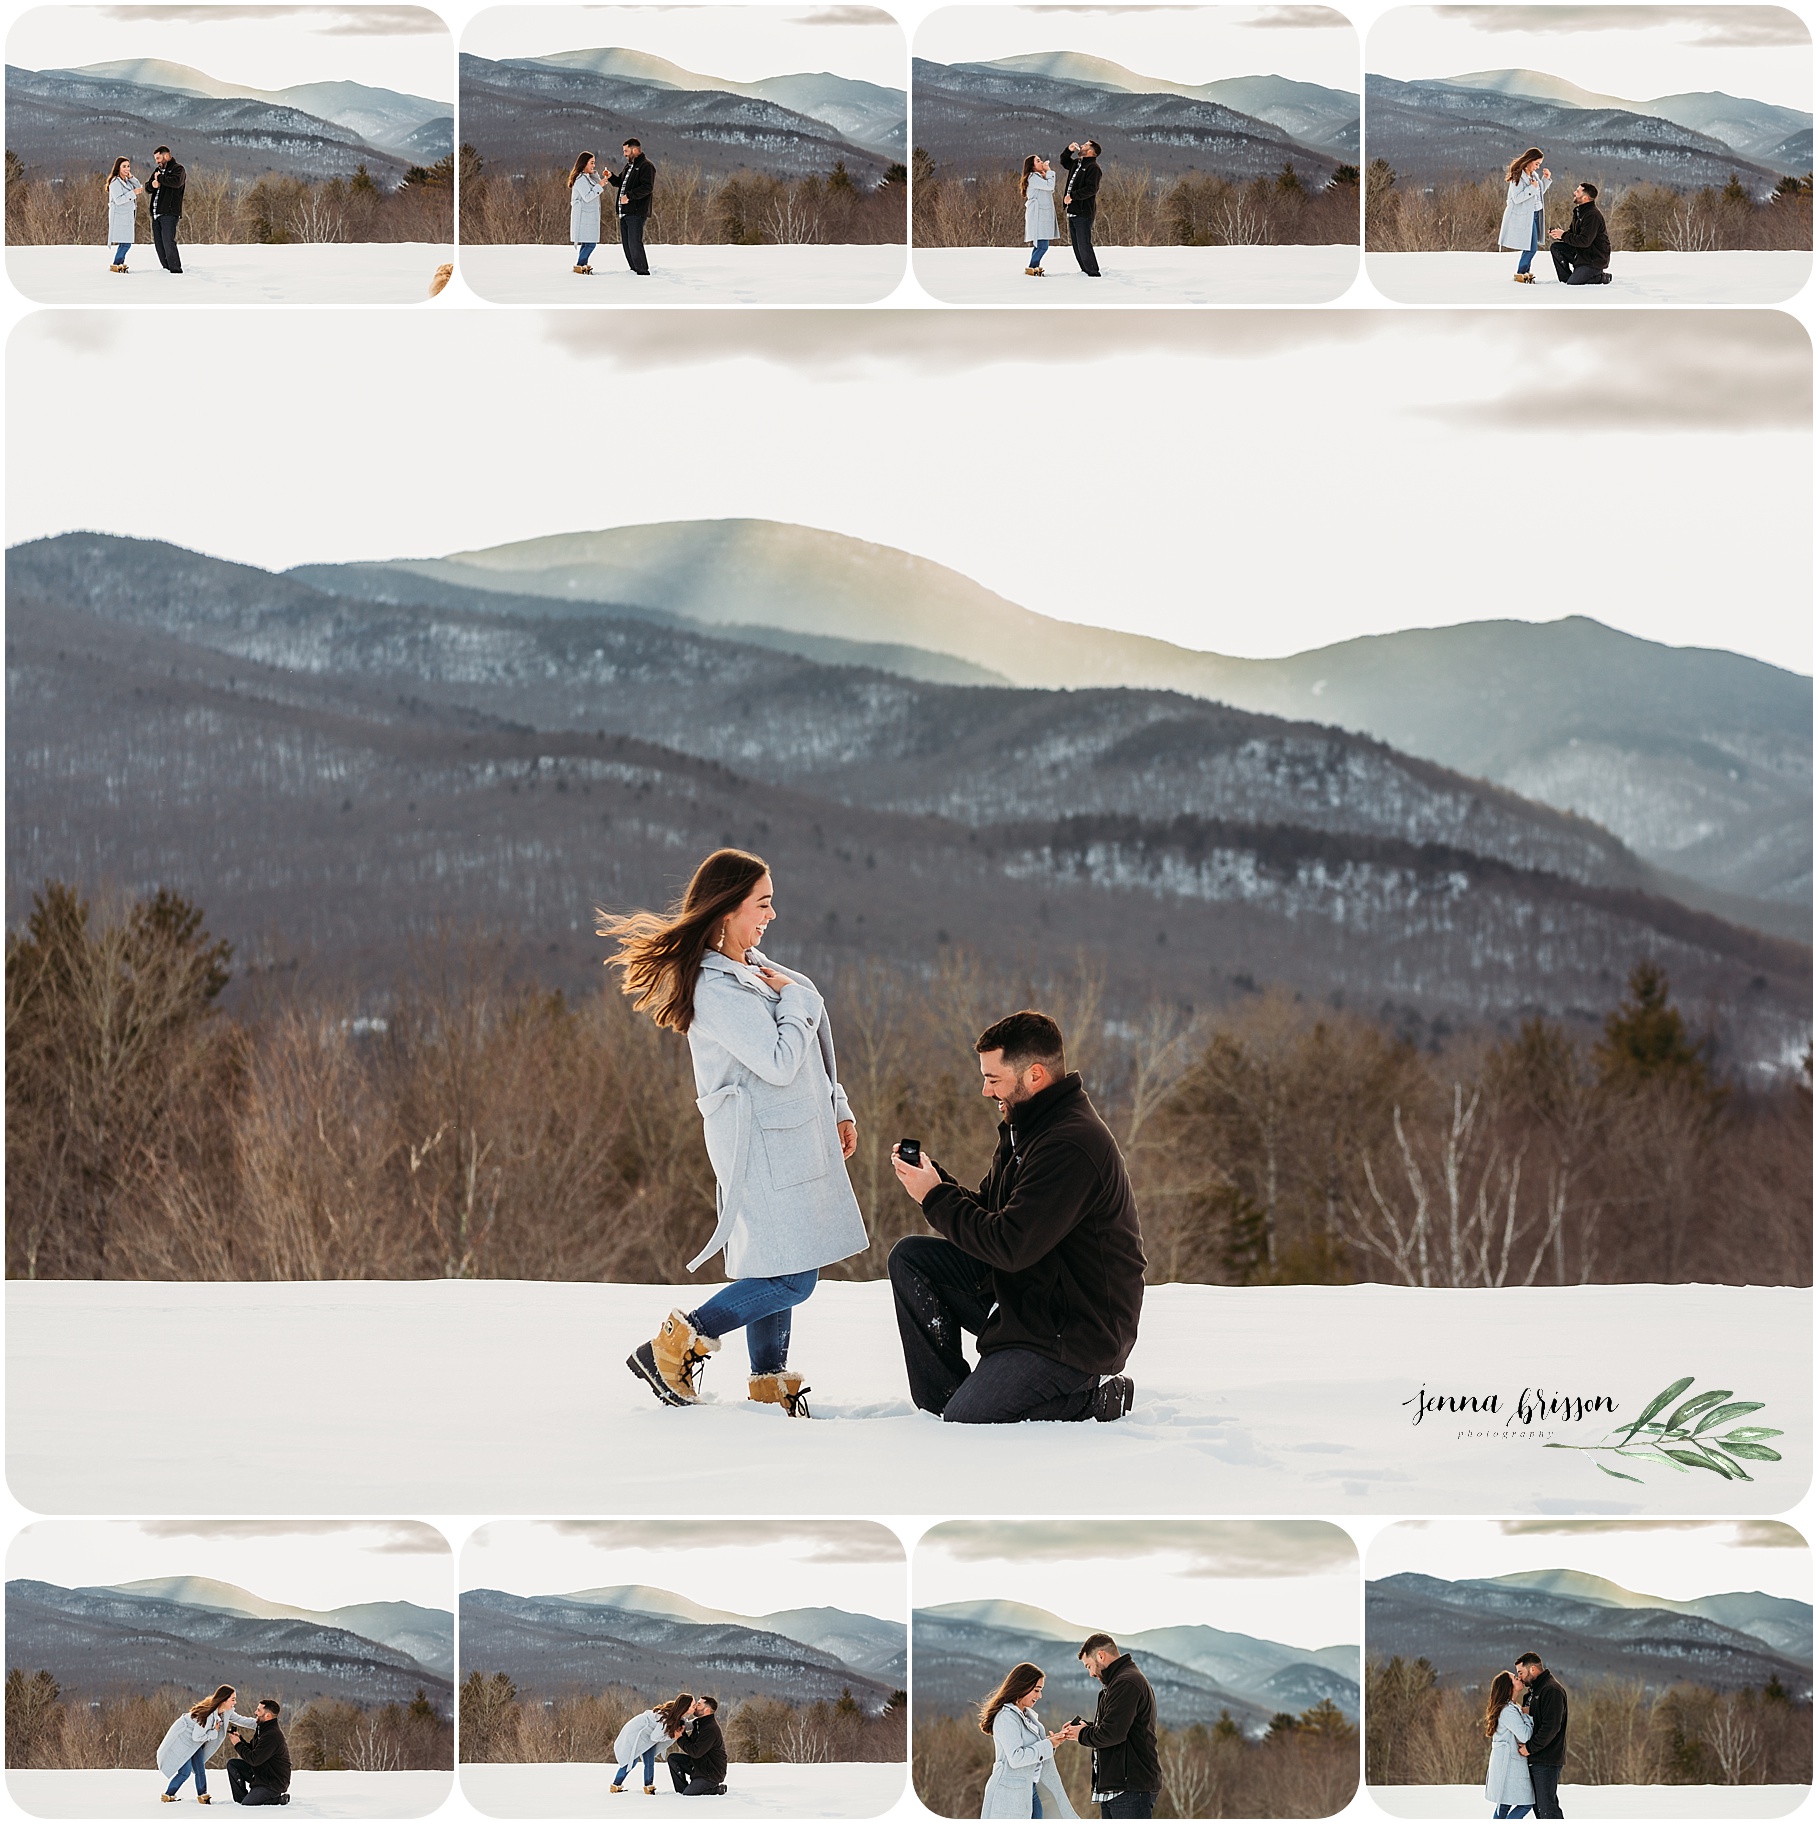 Surprise Proposal Photography Session Engagement Session Vermont Trapp Family Lodge - Jenna Brisson Photography - Romantic Vermont Proposal